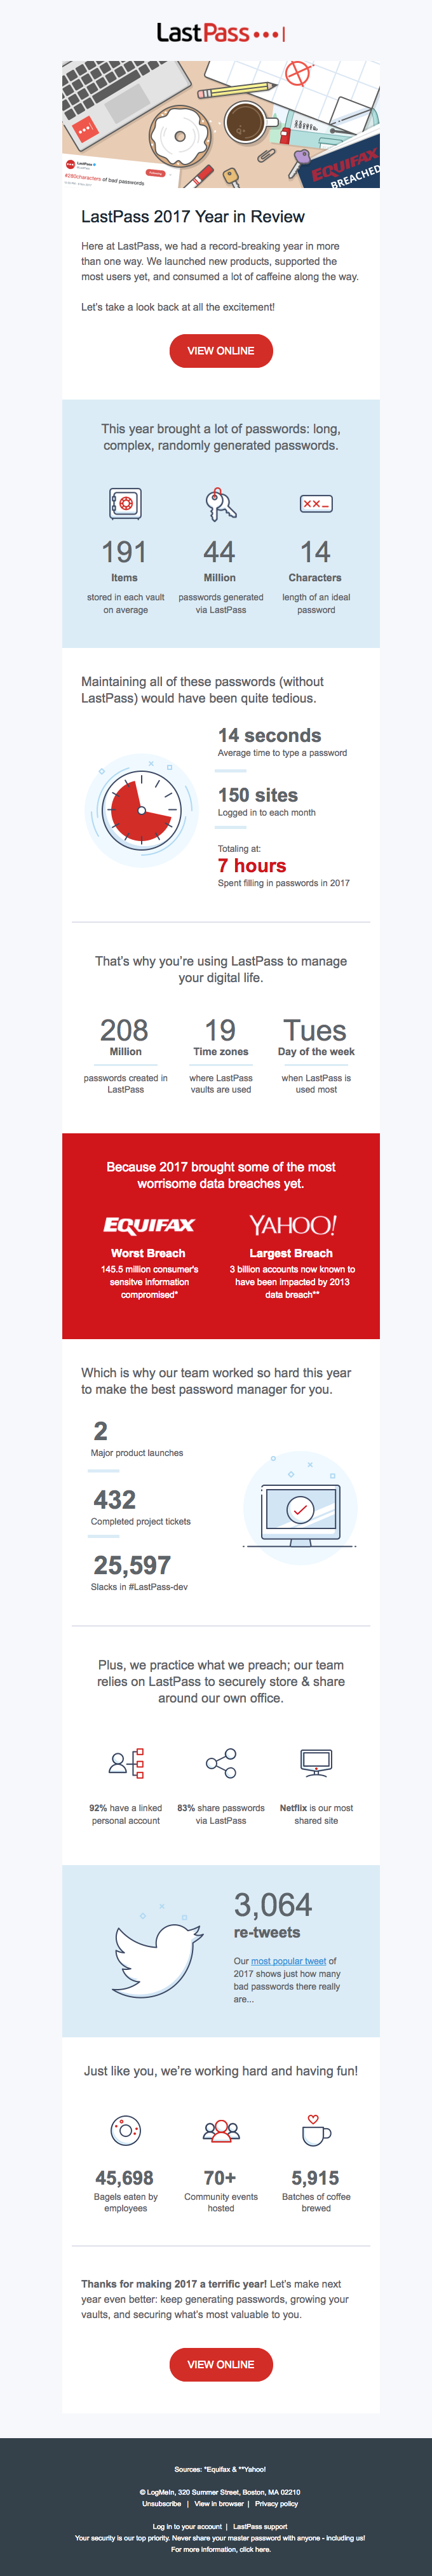 LastPass 2017 Year in Review